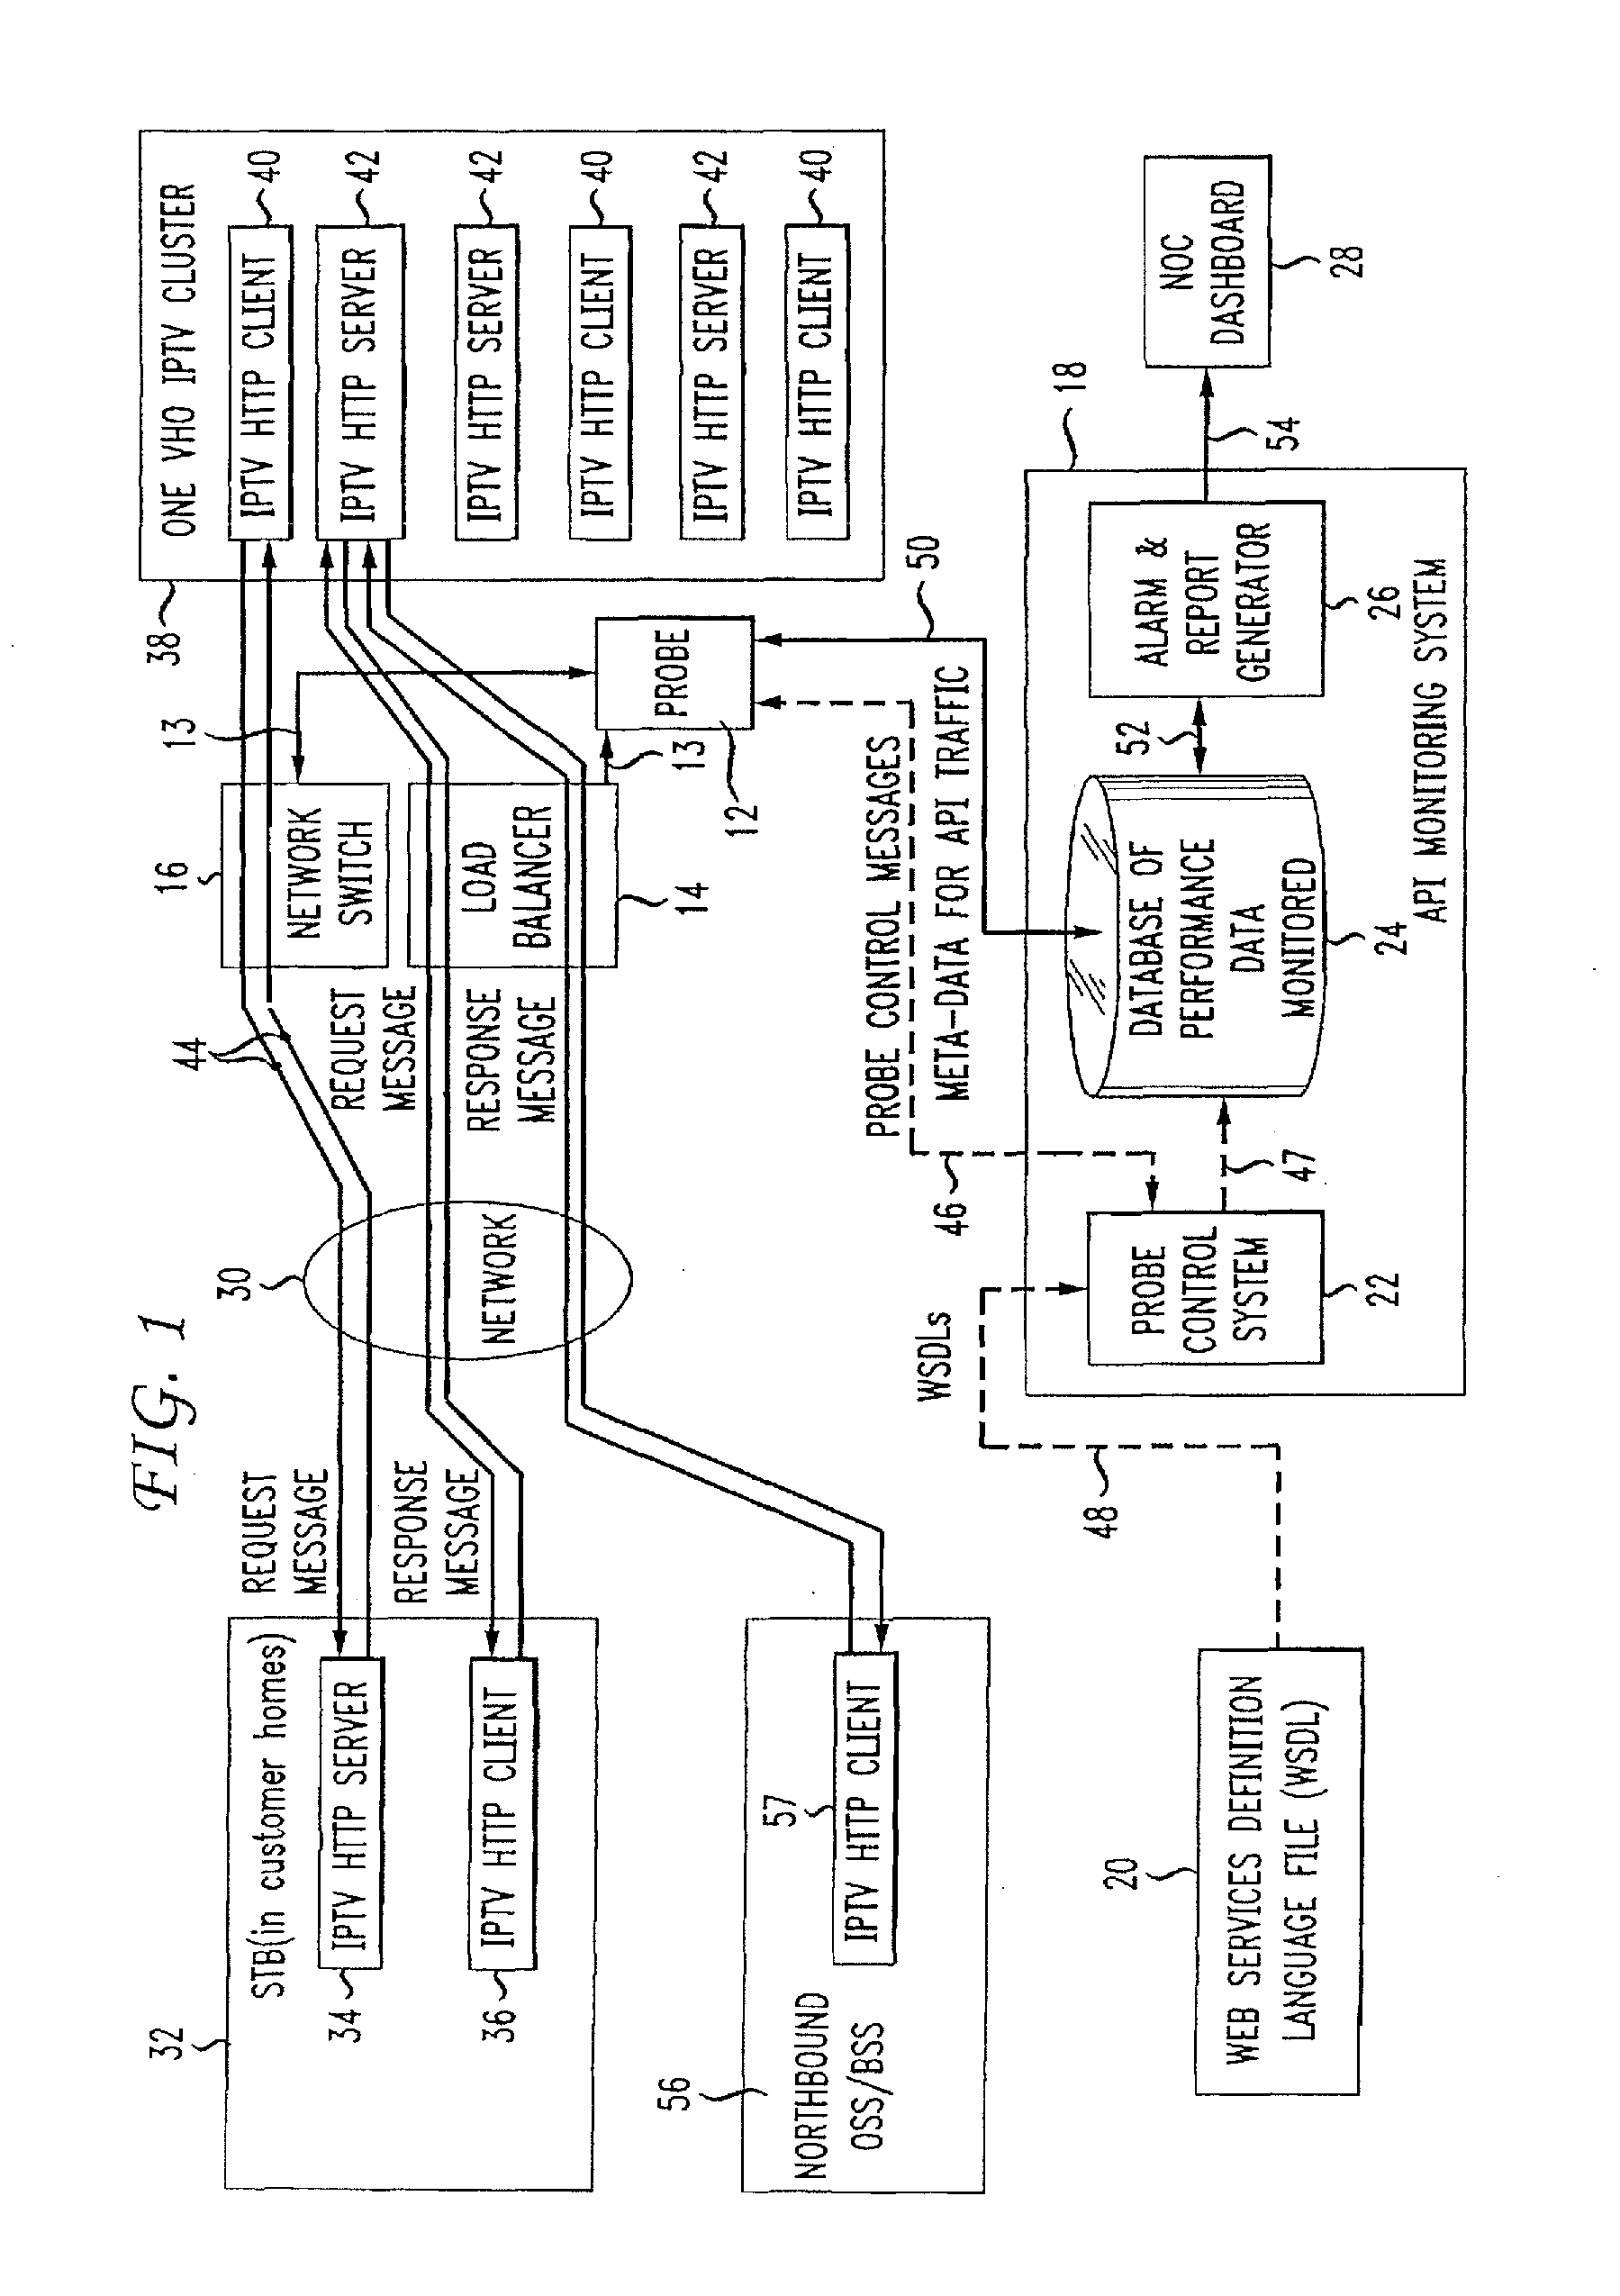 Method and Apparatus for Measuring the End-to-End Performance and Capacity of Complex Network Service